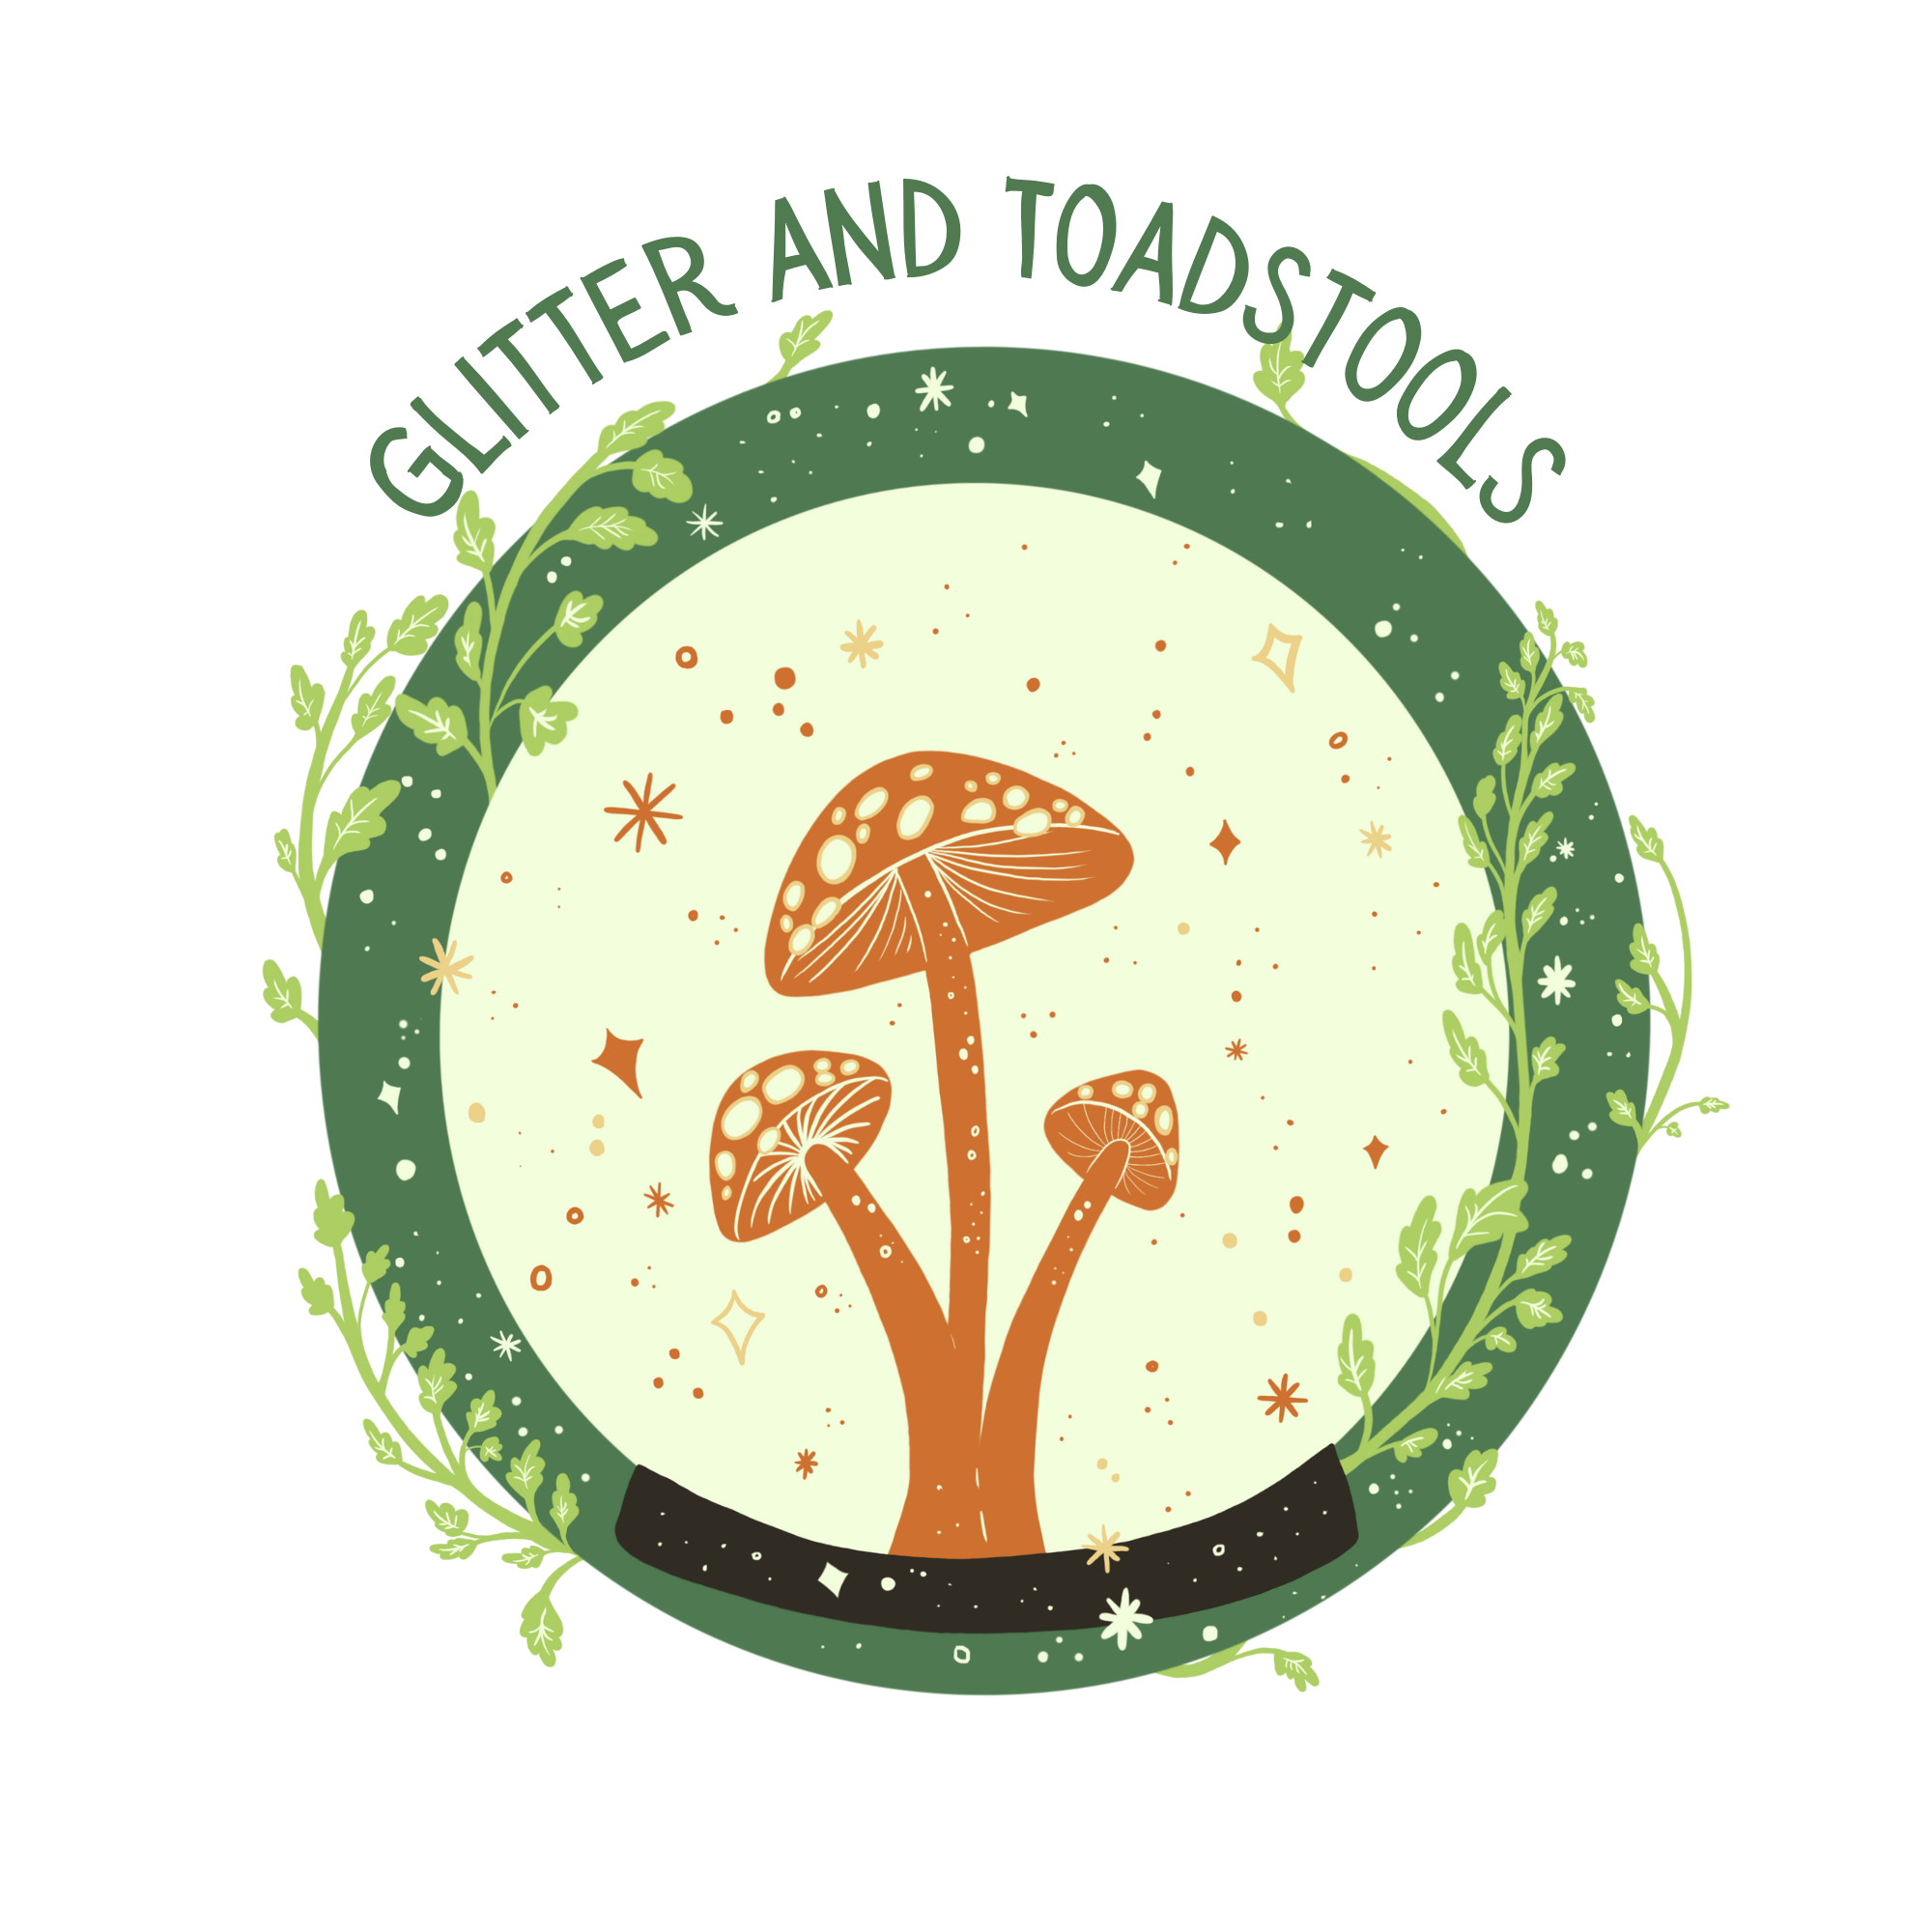 Glitter and Toadstools